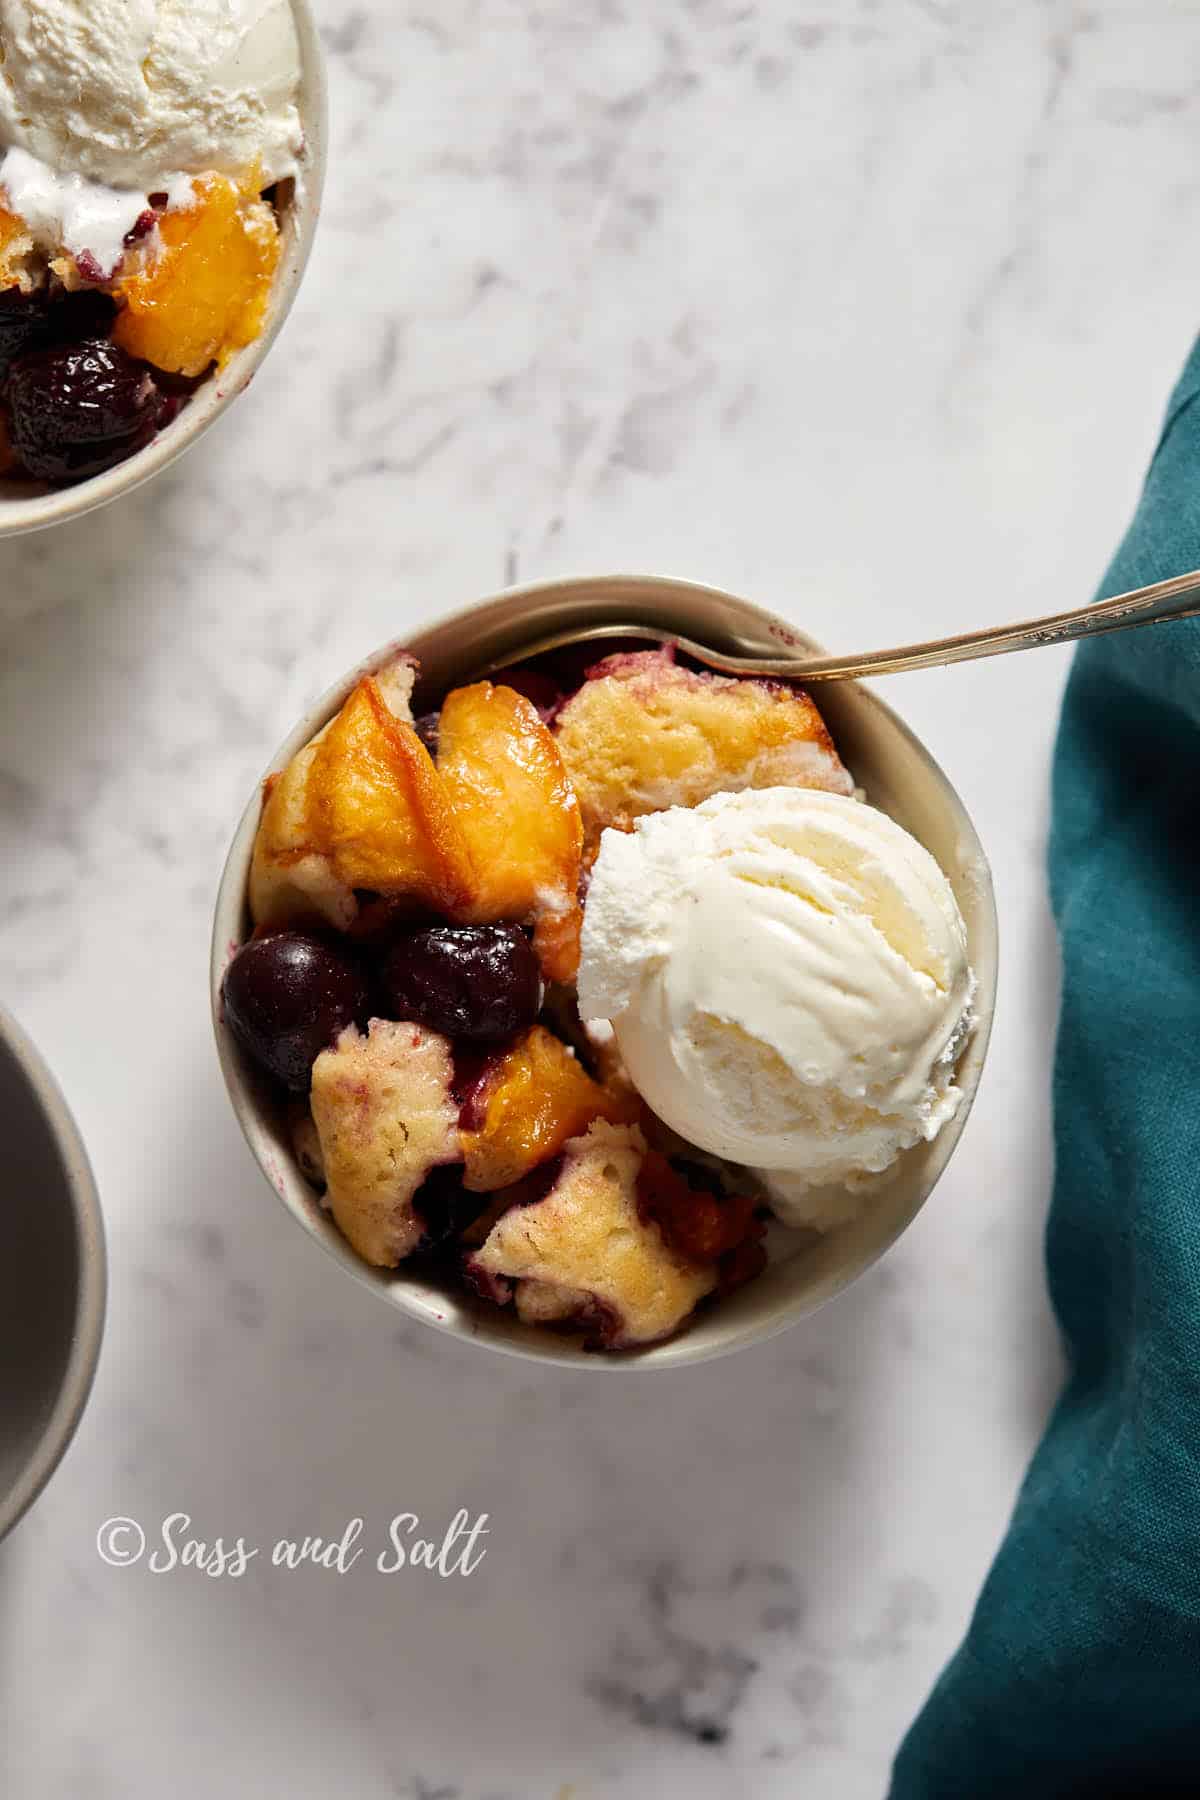 A bowl of peach and cherry cobbler topped with a scoop of vanilla ice cream, captured from above on a marble surface with a teal napkin partially visible.